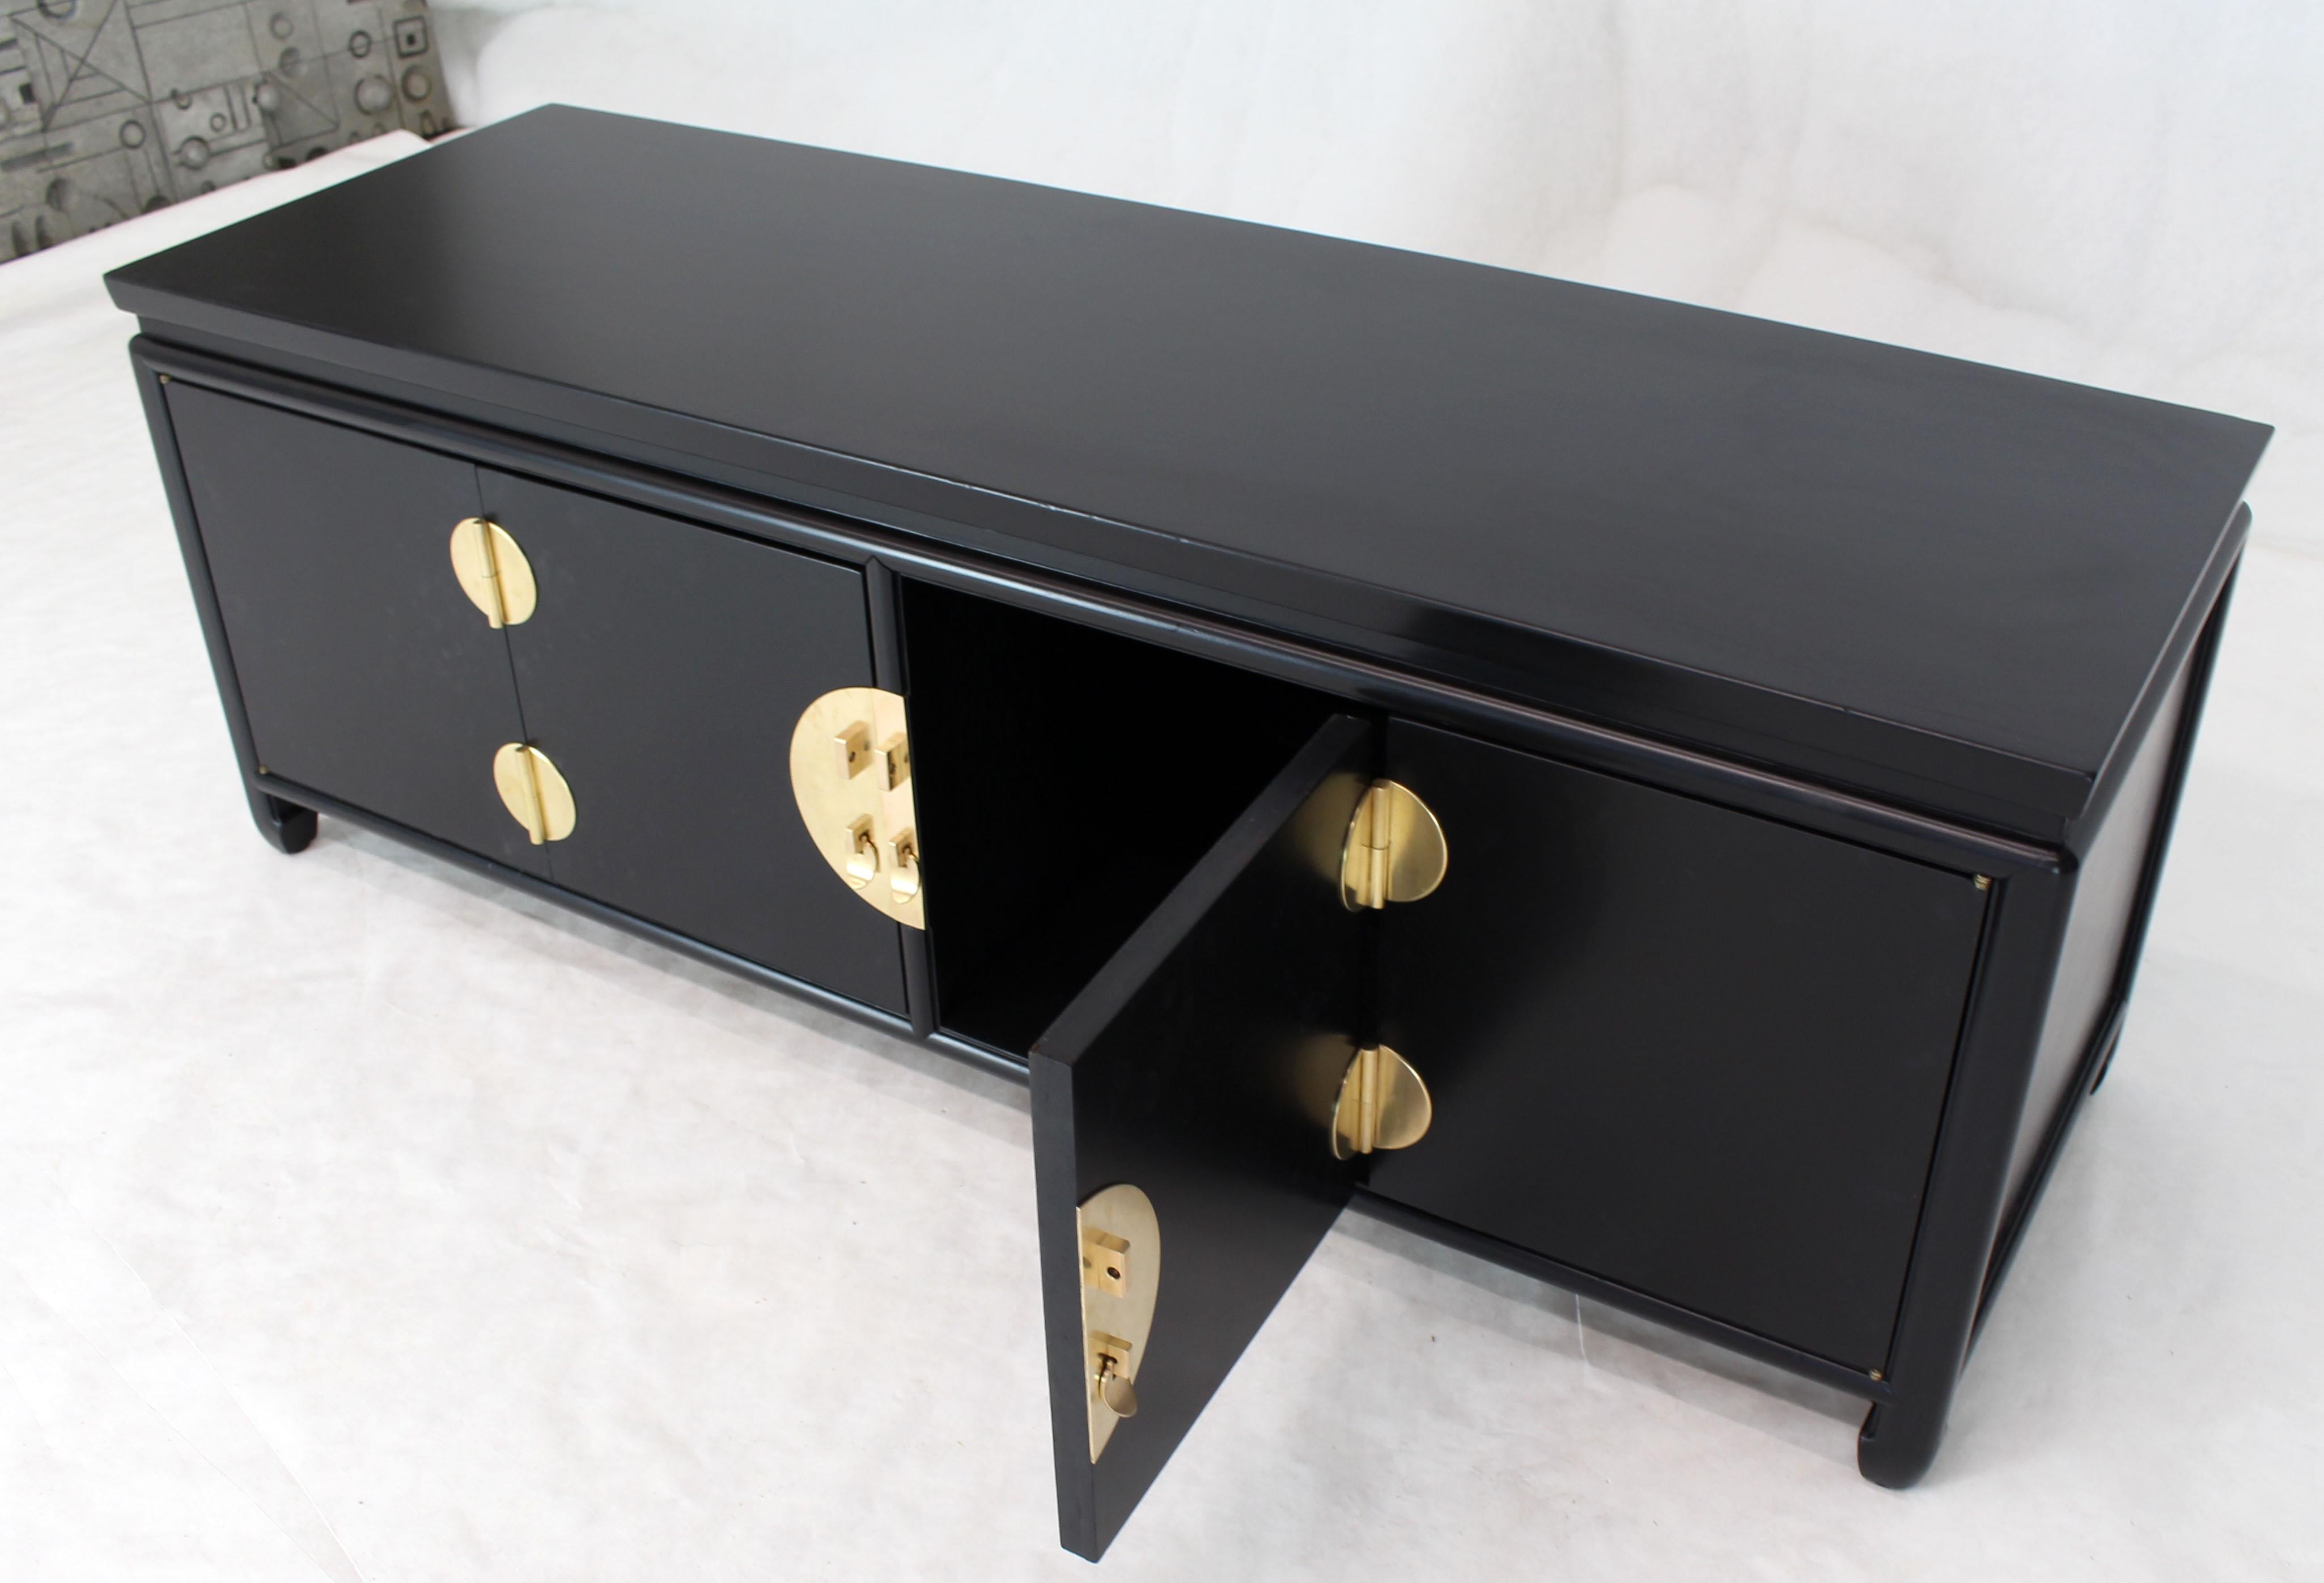 Black Ebonized Low Petite Small Credenza Stand with Solid Brass Hardware Pulls For Sale 1